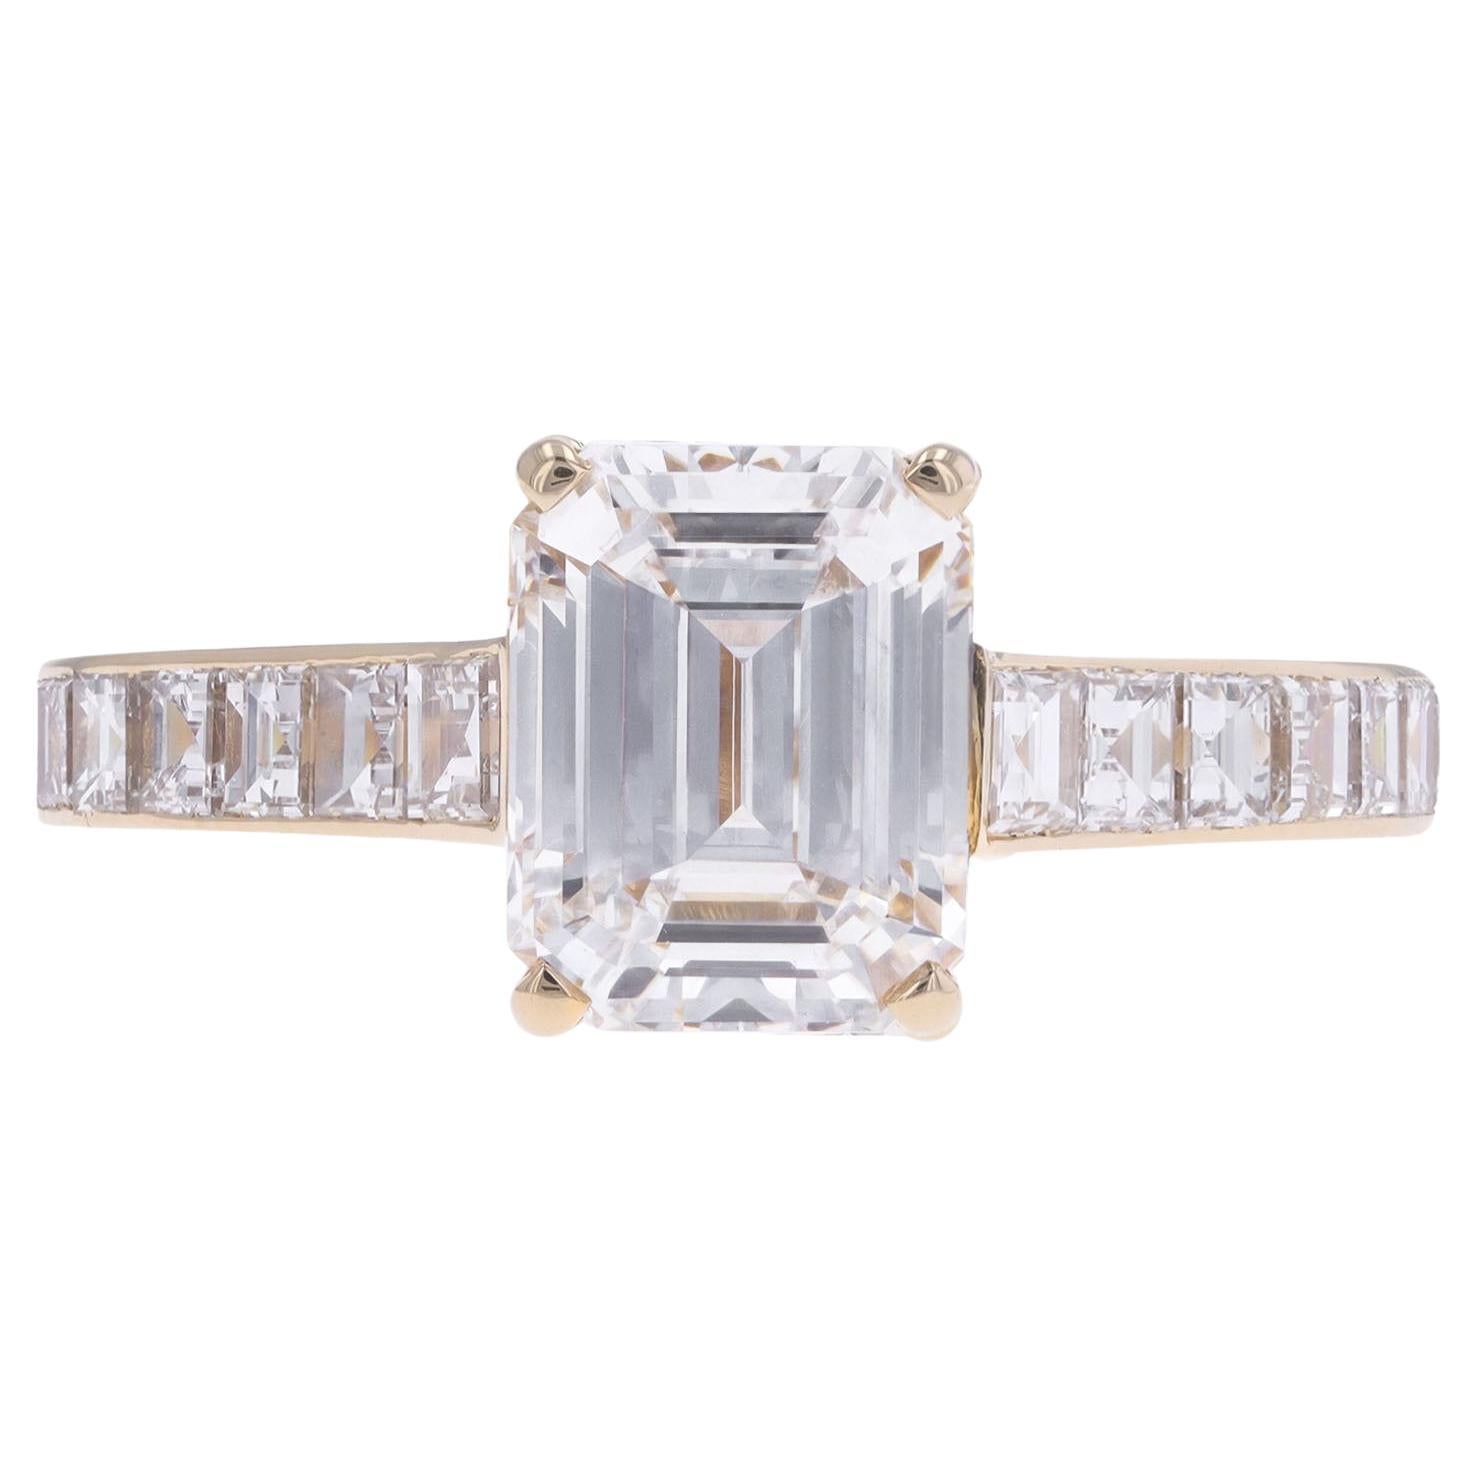 Cartier diamond flanked solitaire ring, French.